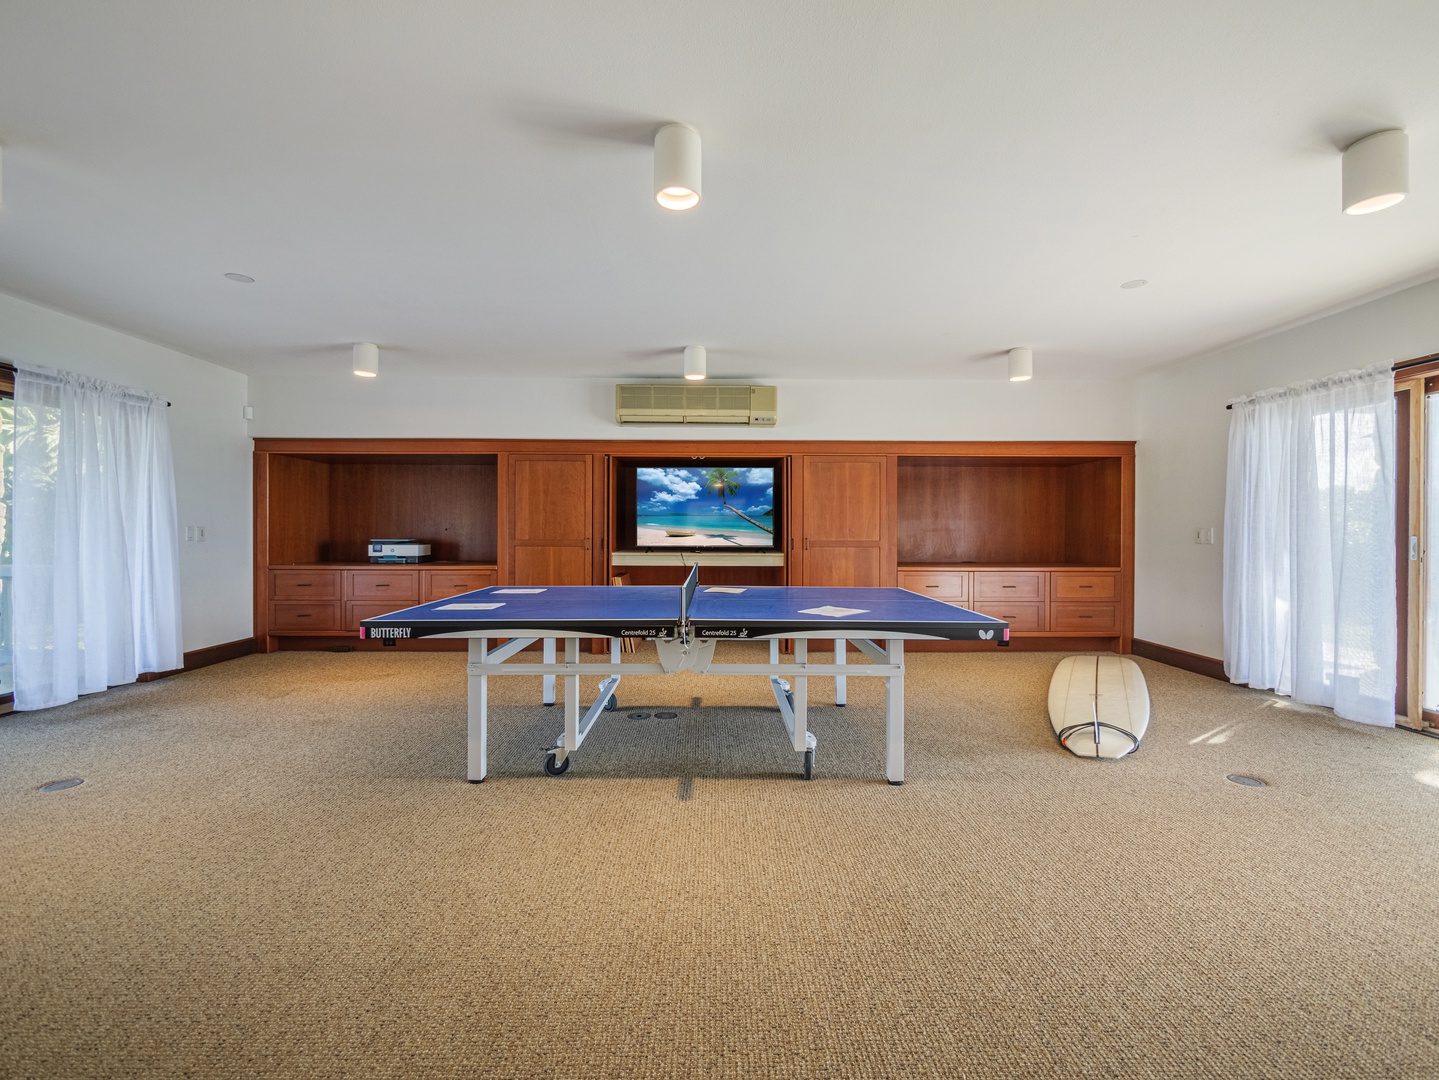 Waianae Vacation Rentals, Konishiki Beachhouse - Come play in your spacious game room with ping-pong table, perfect for entertainment and fun.